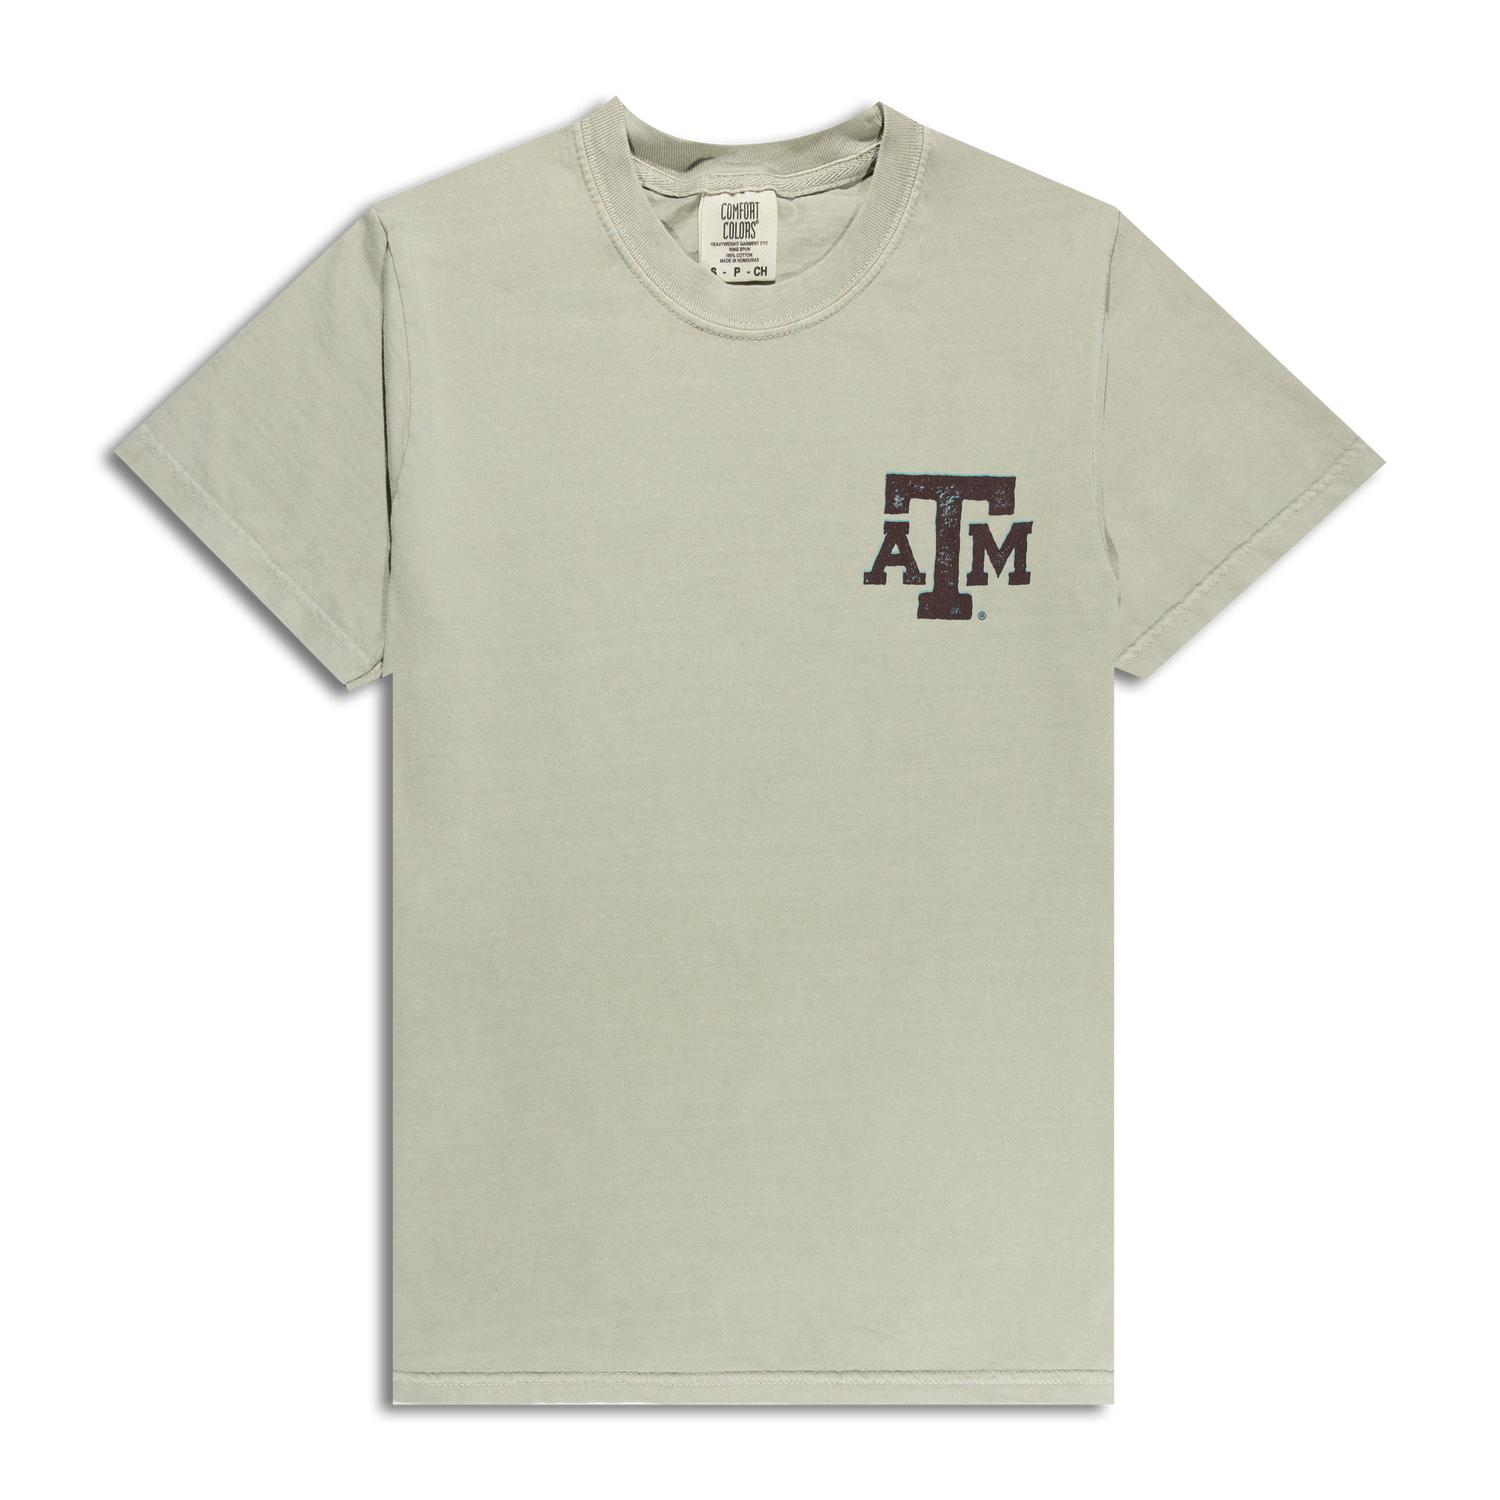 Official thanks And Gig 'Em Texas A&M Shirt, hoodie, long sleeve tee